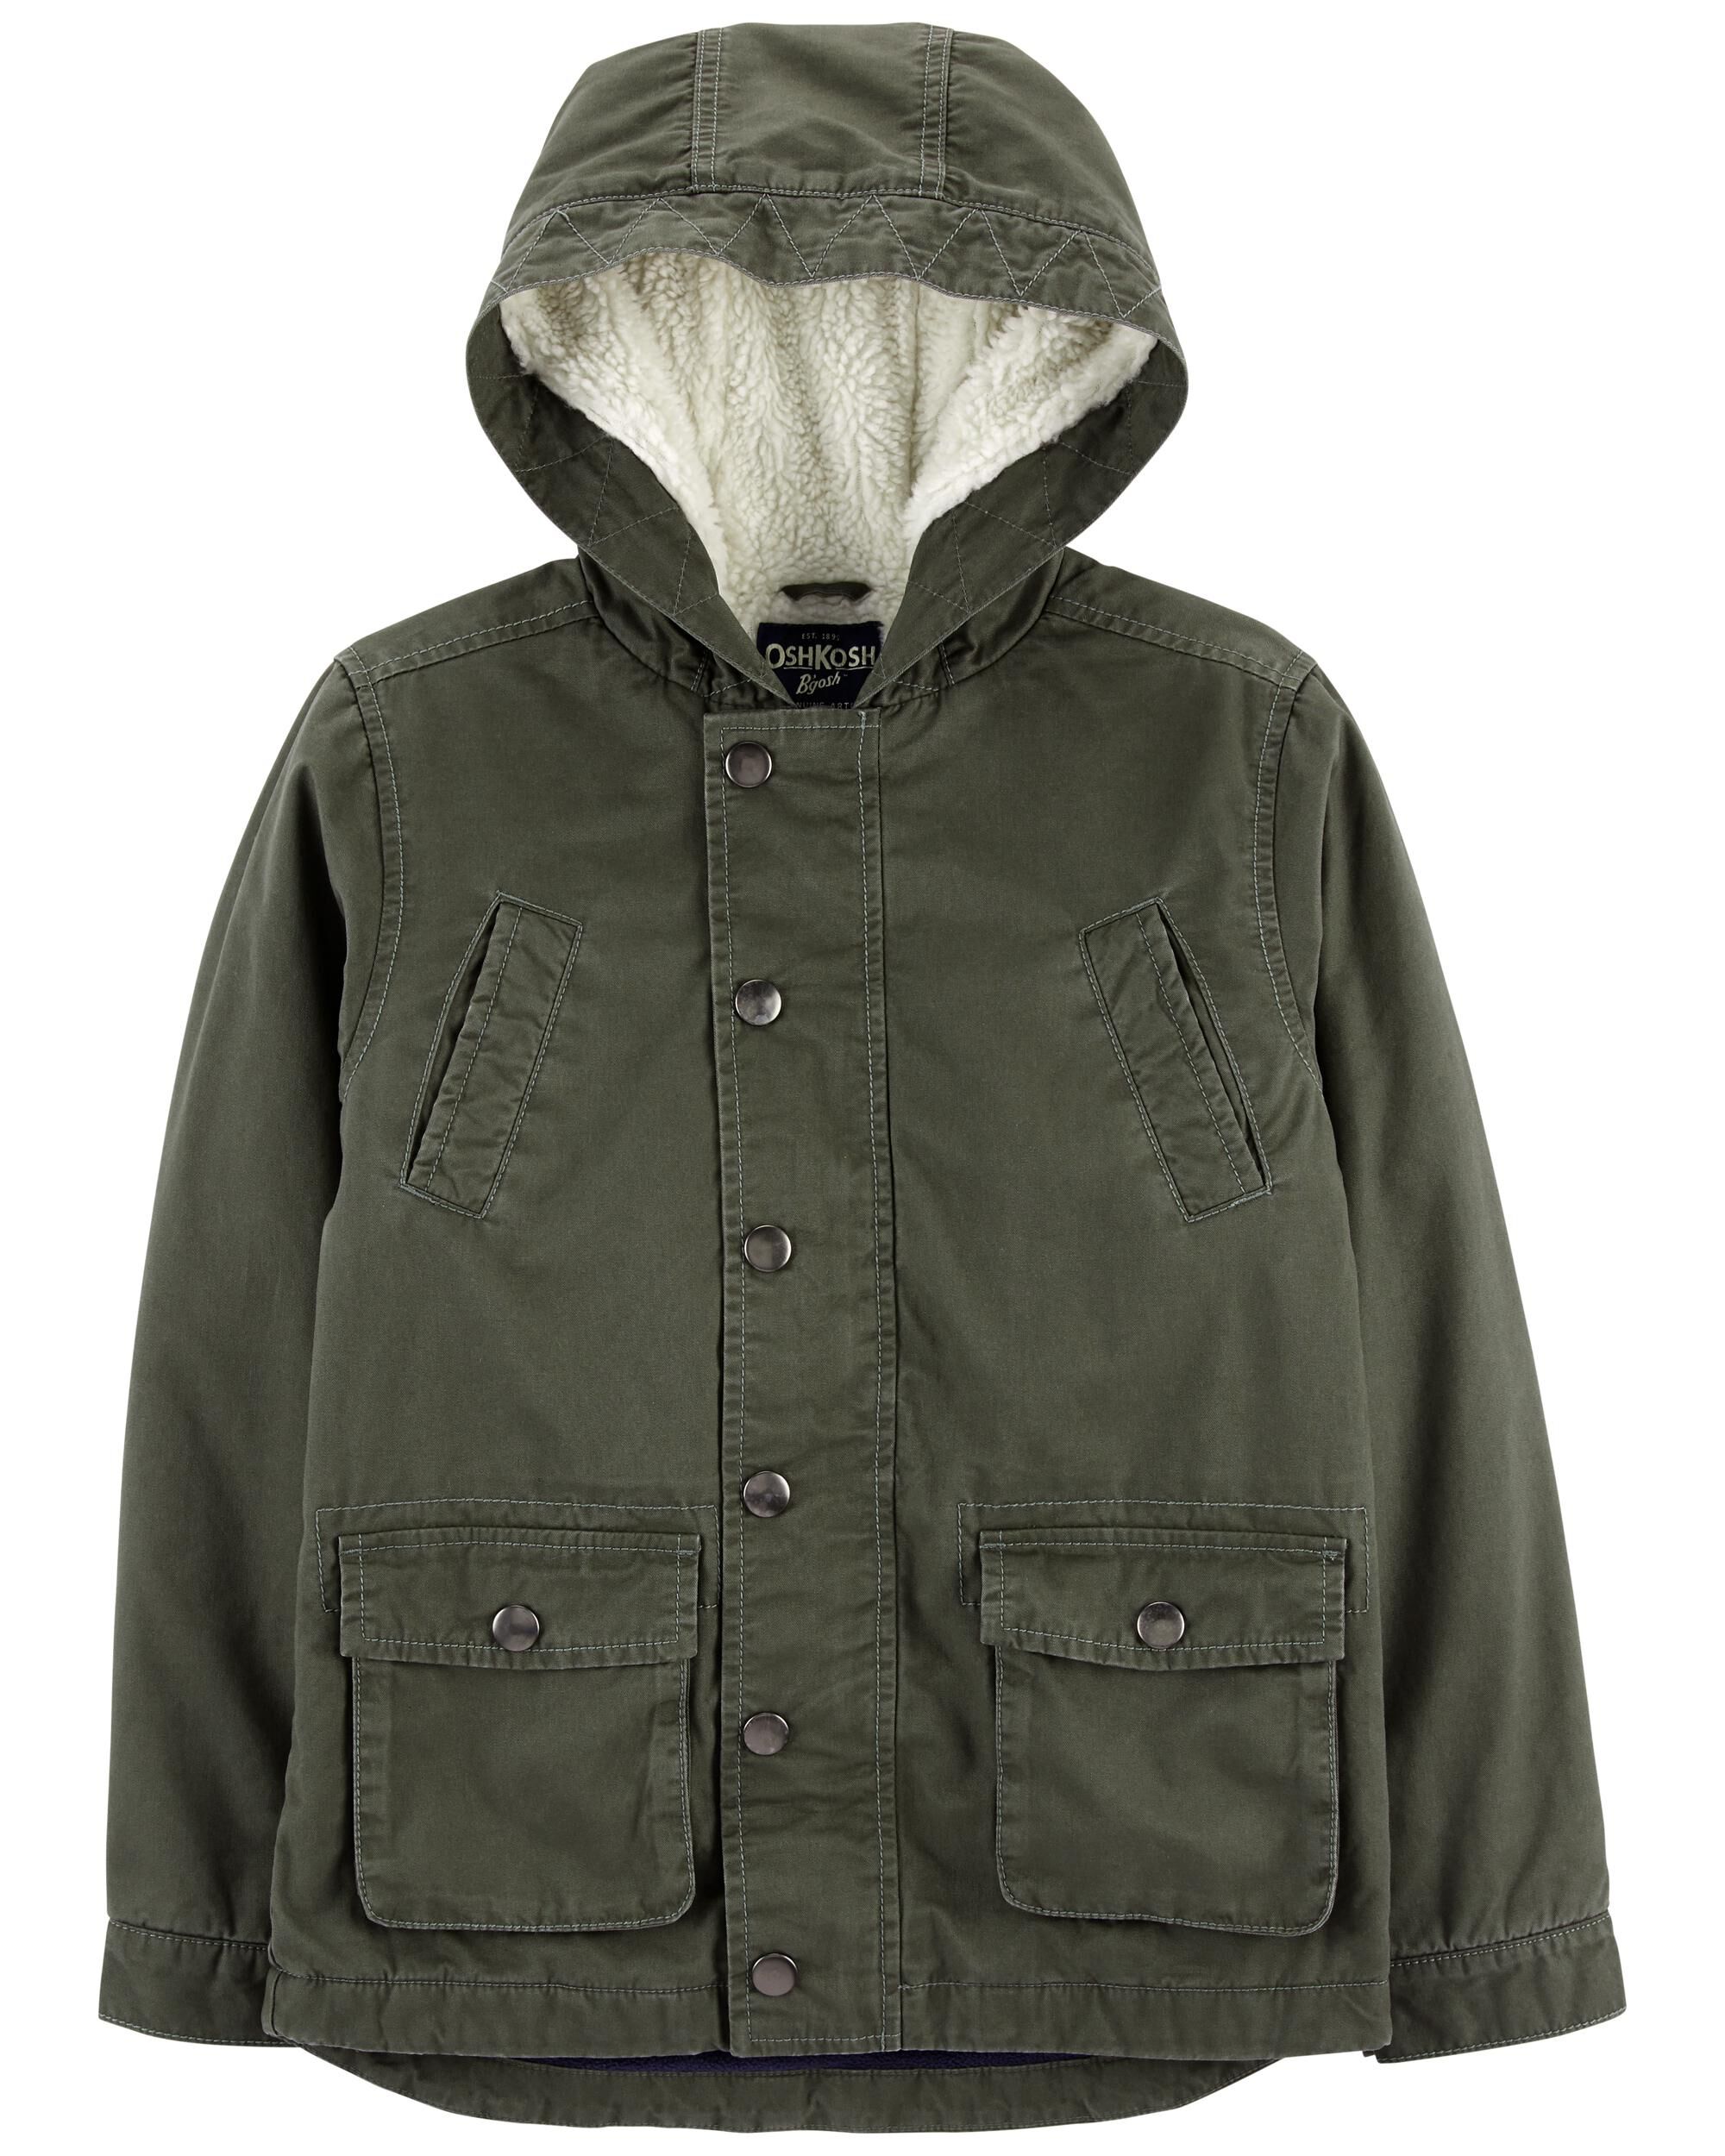  *CLEARANCE* Sherpa-Lined Cargo Jacket 